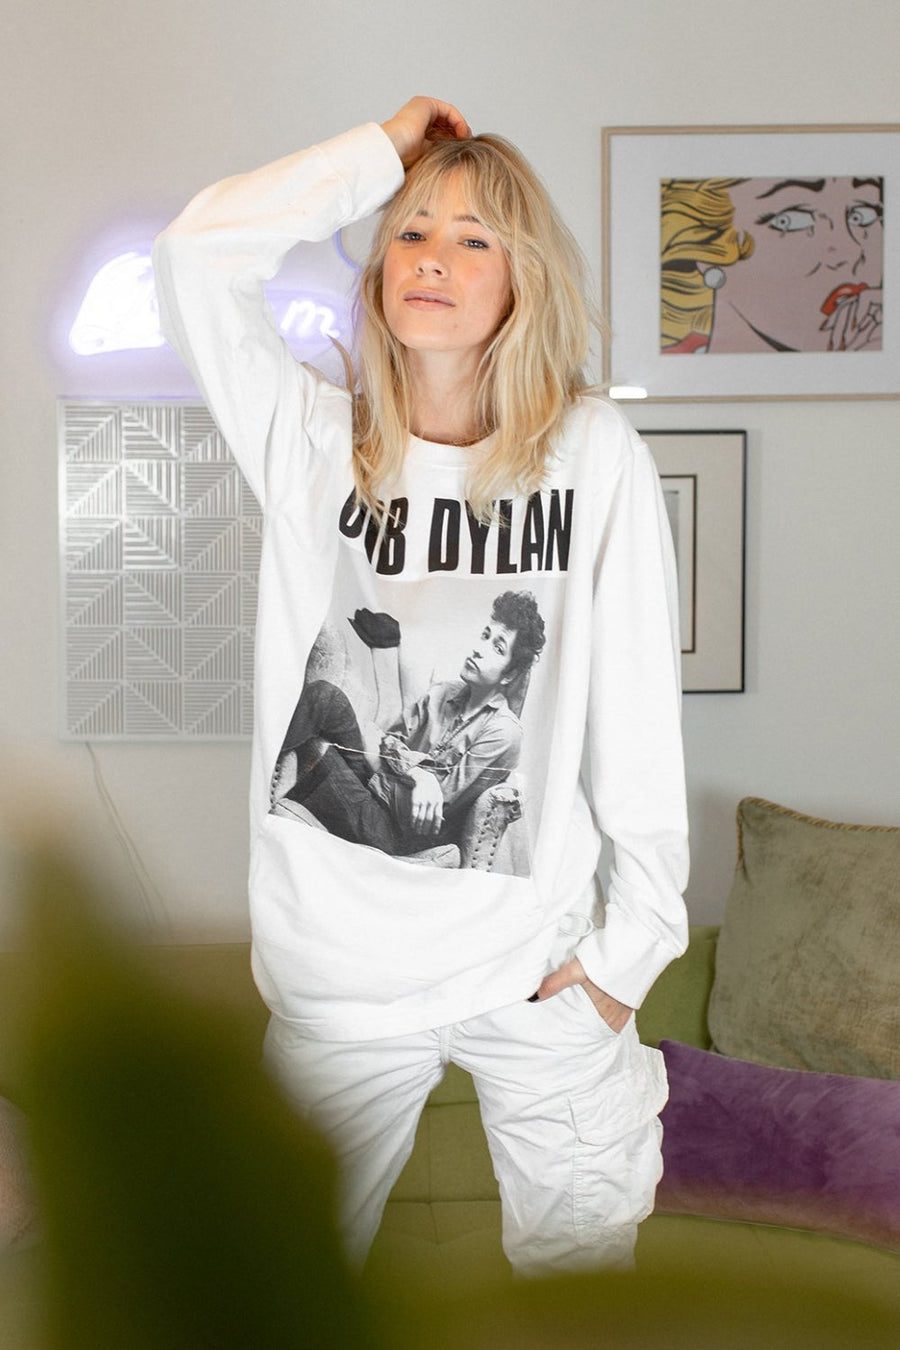 Bob Dylan Pullover by People of Leisure - shopatkonus